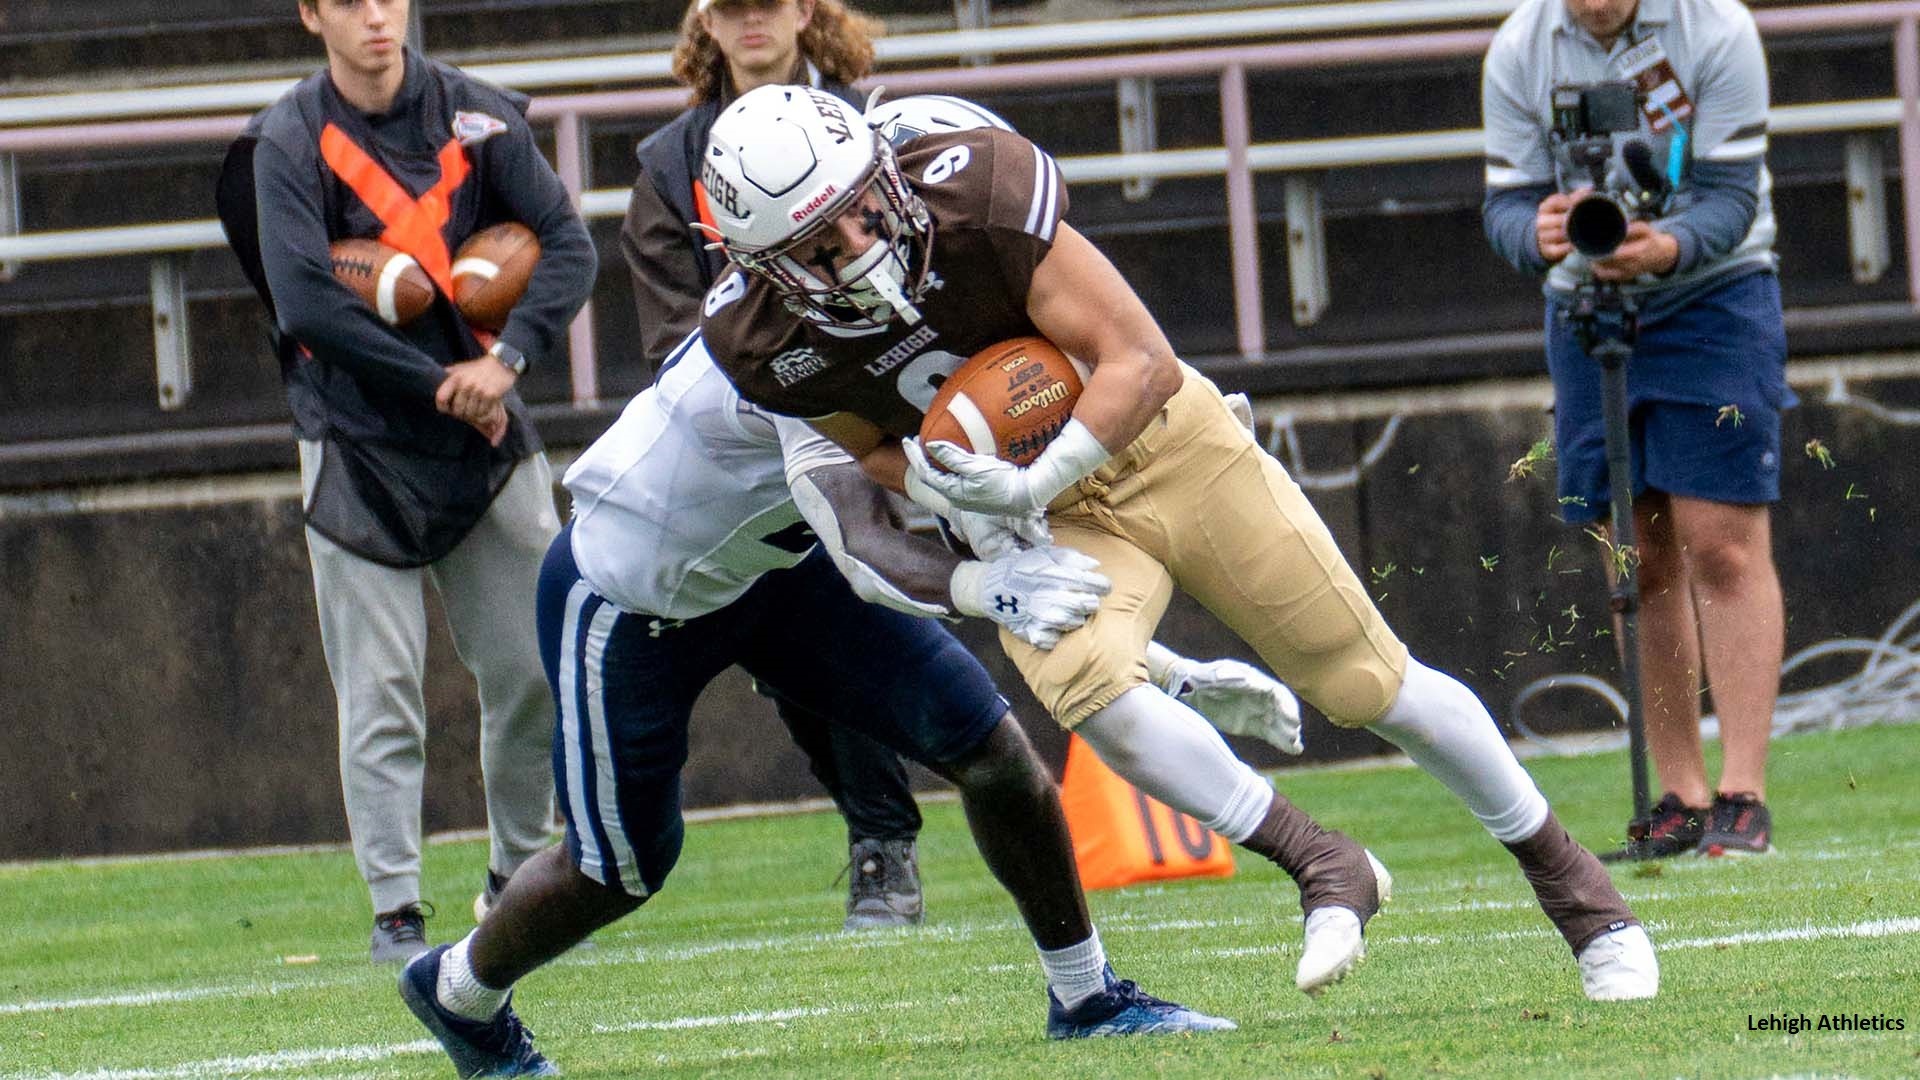 Lehigh Hopes to be Ahead of Schedule in Holy Cross-Led Patriot League Race